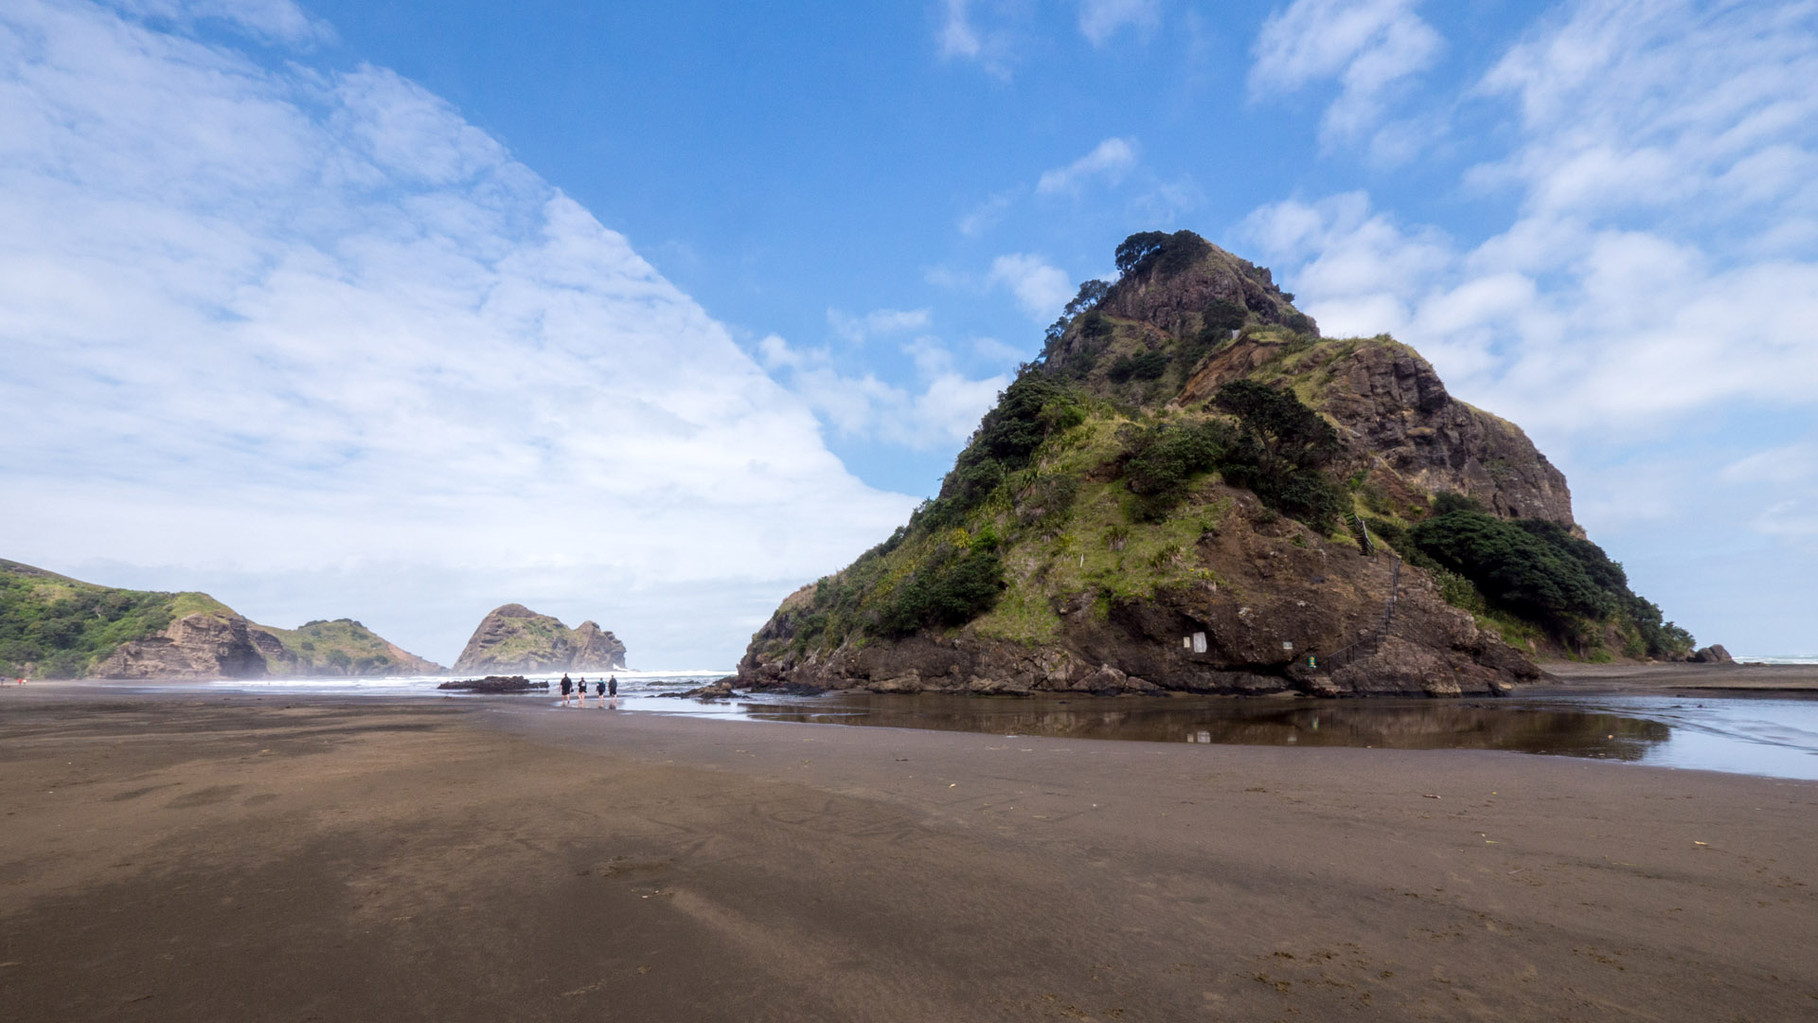 Rough but beutiful West Coast with dark sand beach, just one hour drive from Auckland. Piha beach with Lion rock